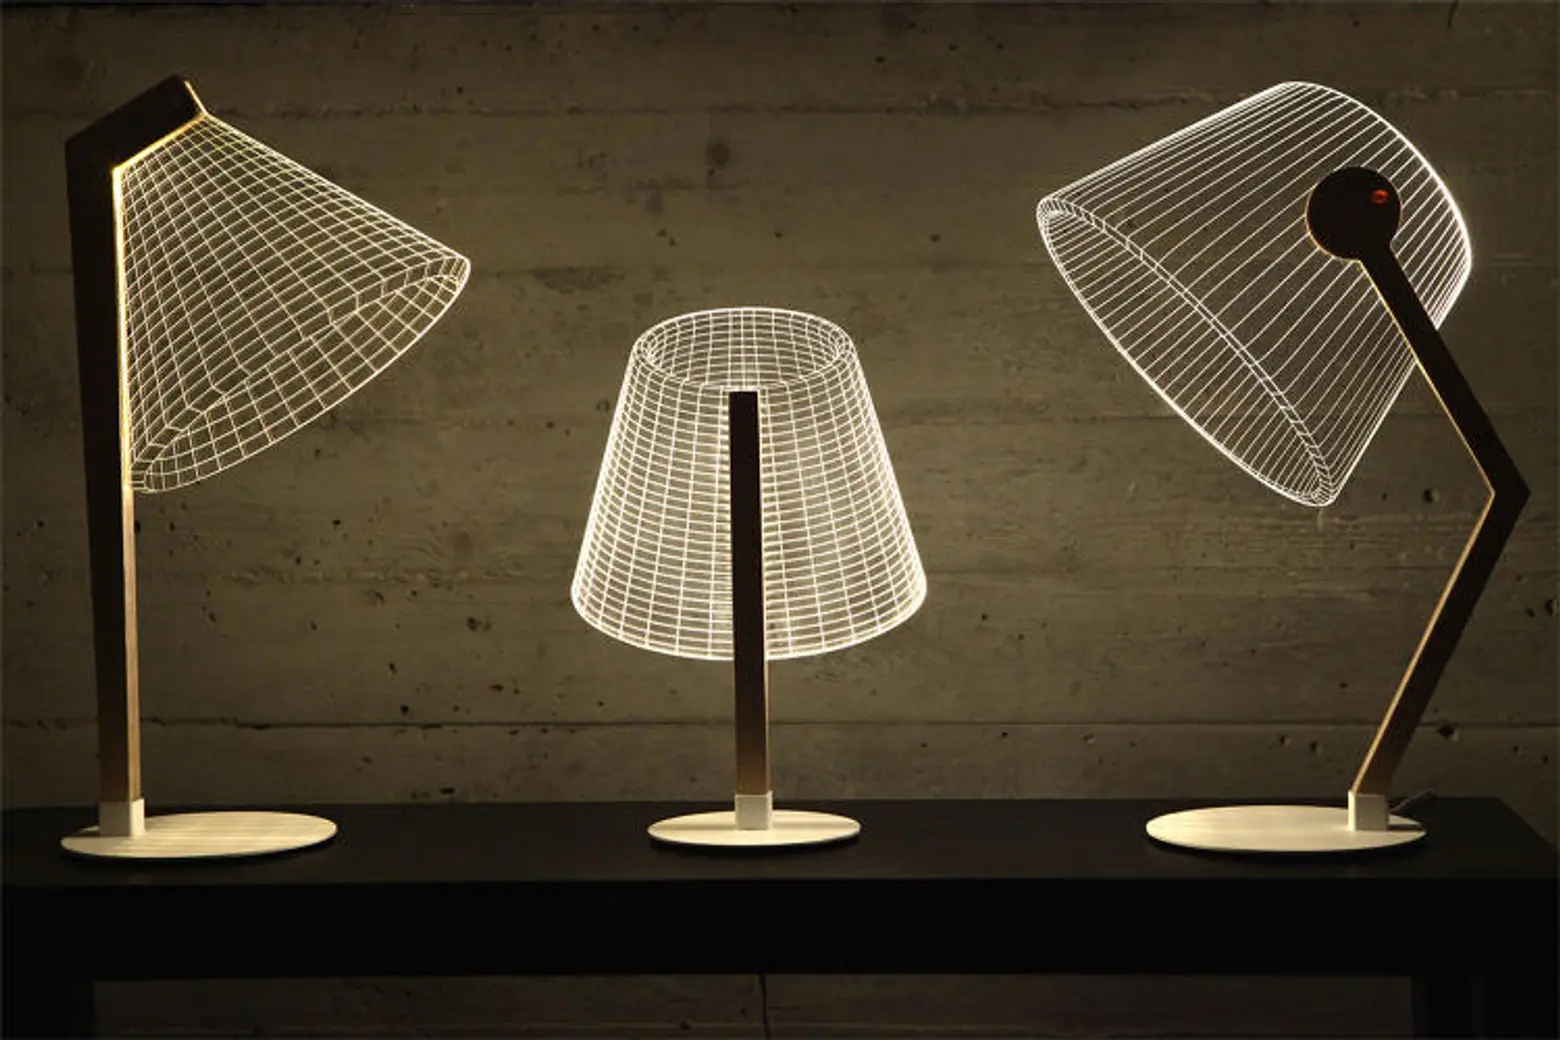 Studio Cheha’s Awesome BULBING LED Lamps Are Actually 2D Cutouts